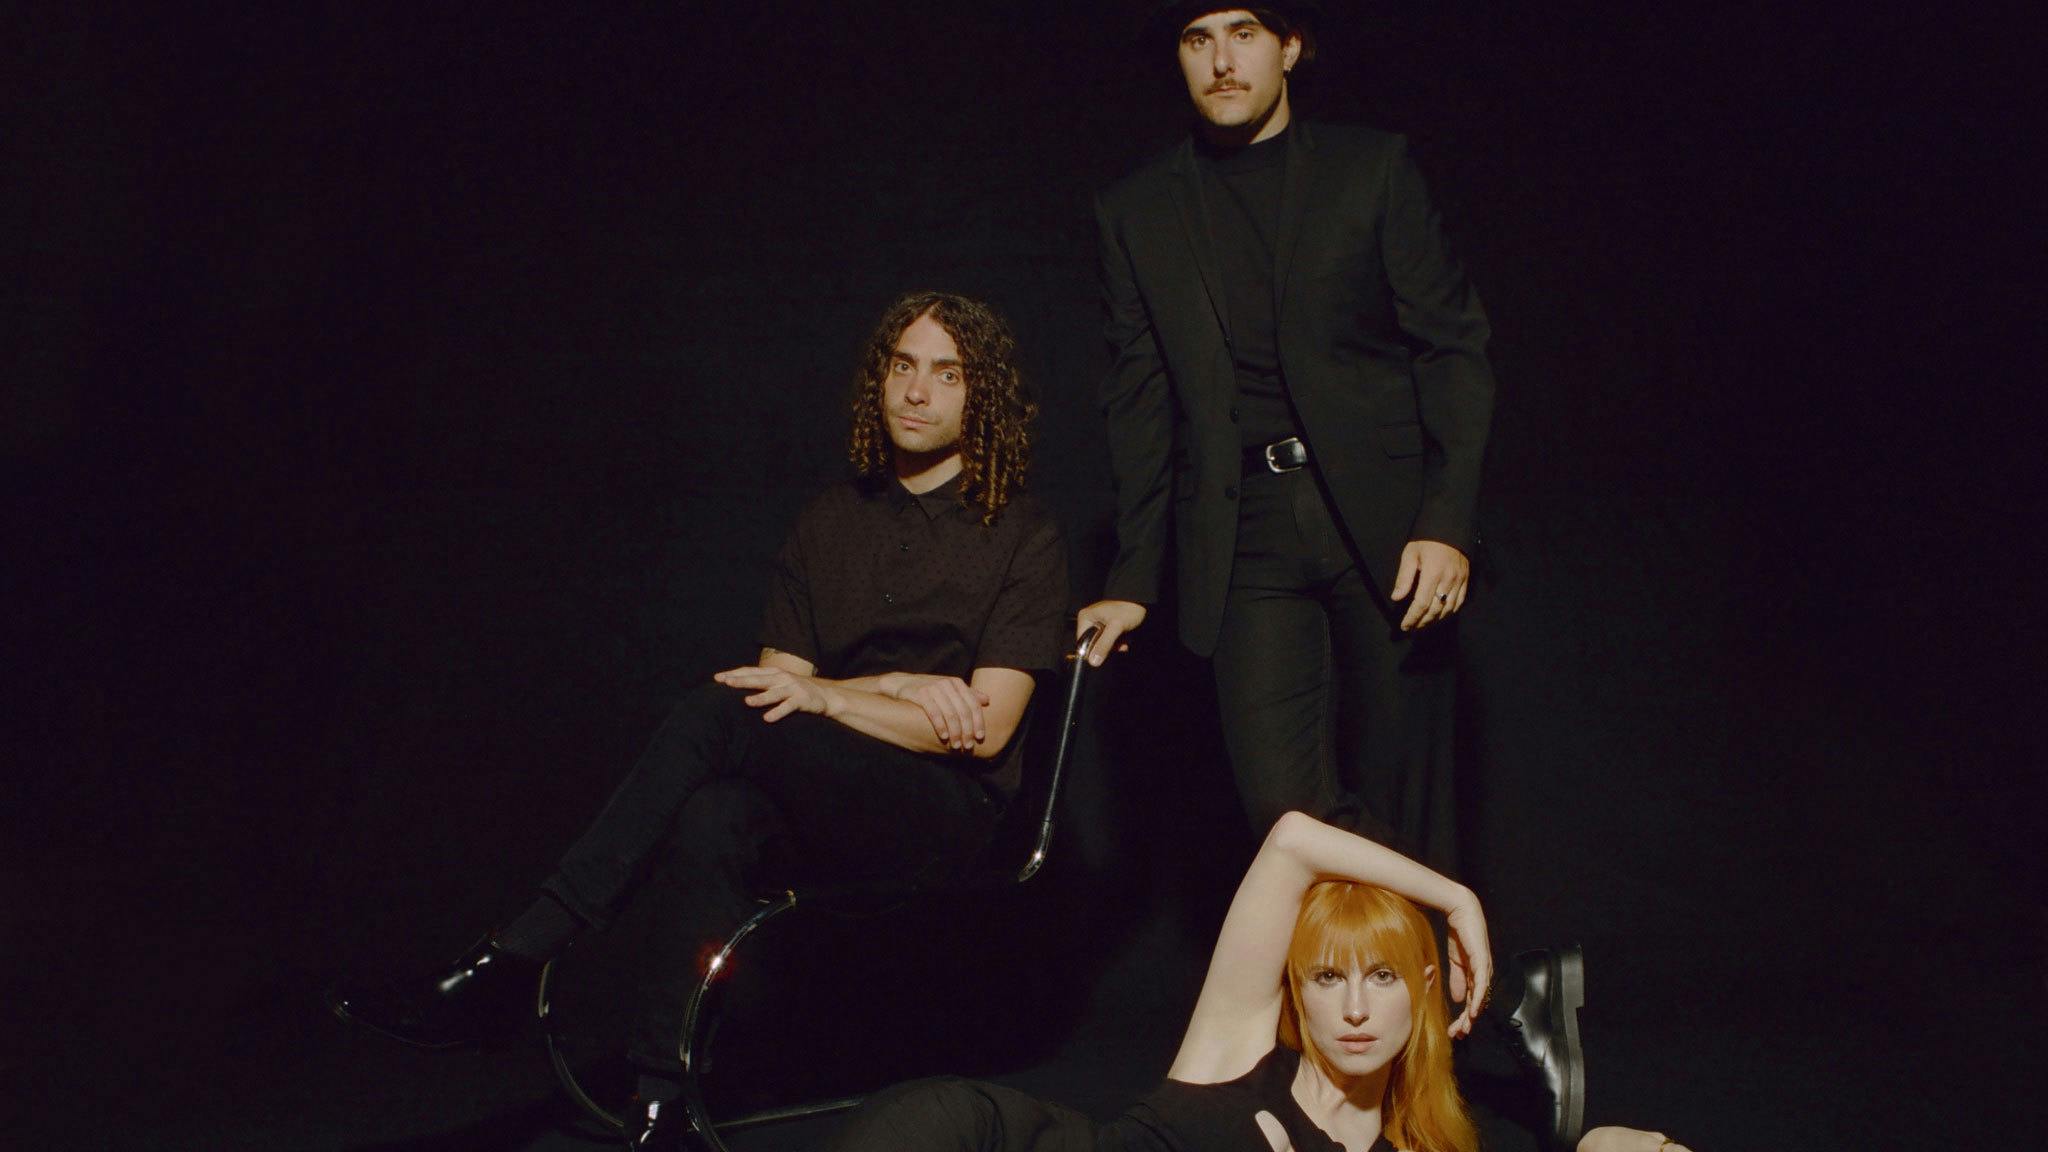 Paramore confirm they’re “freshly independent” and plan to “continue to have a long career in the music industry”